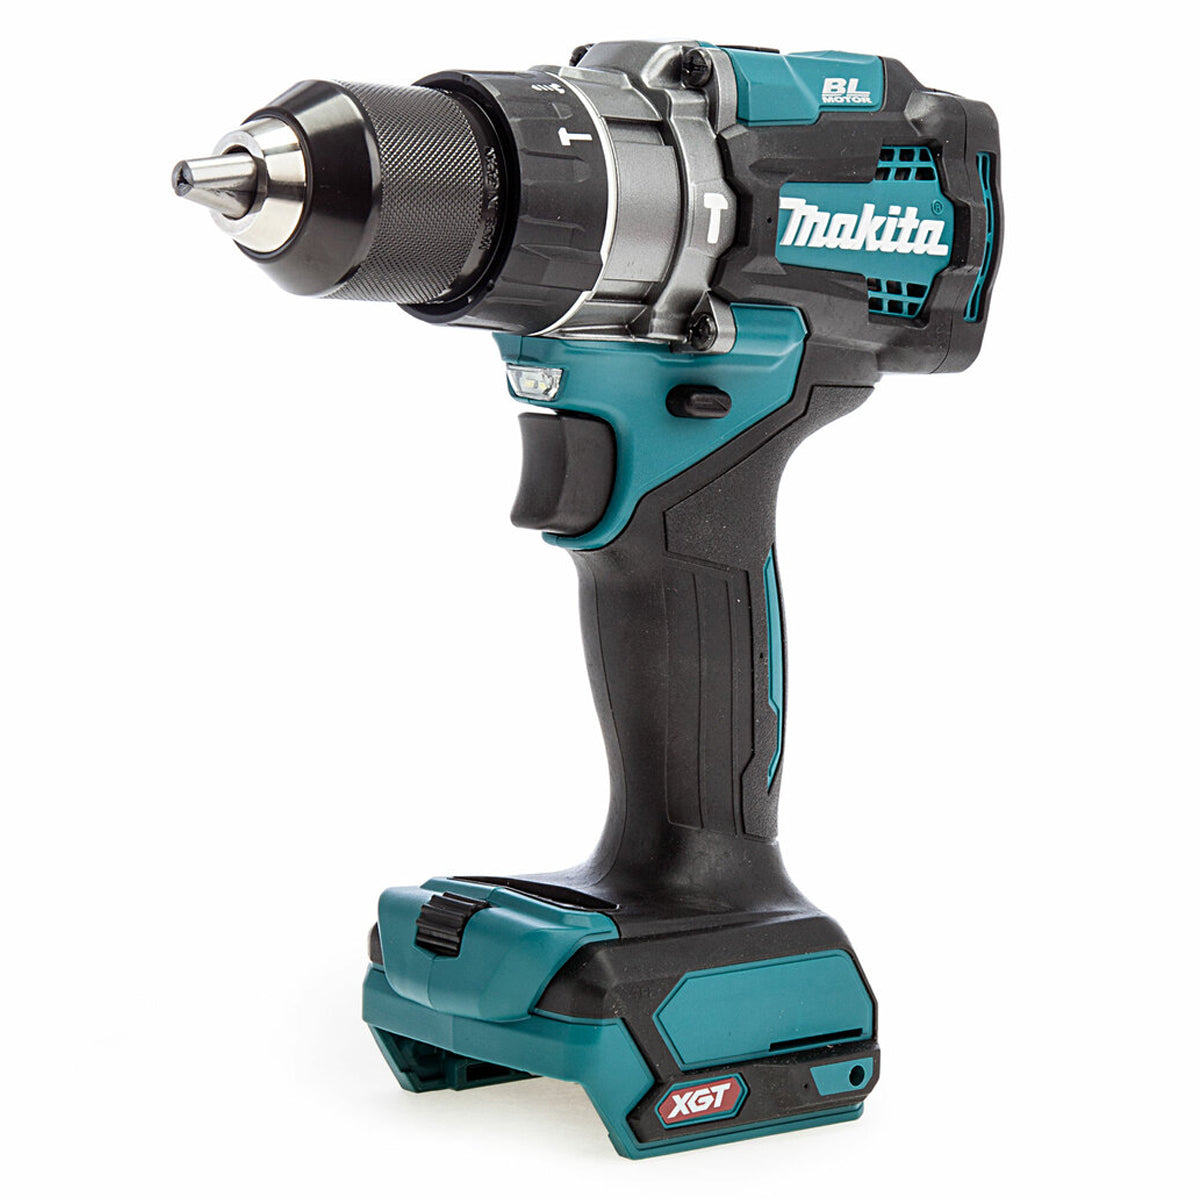 Makita HP001GZ 40V Brushless Combi Drill with 1 x 2.5Ah Battery Charger & Bag